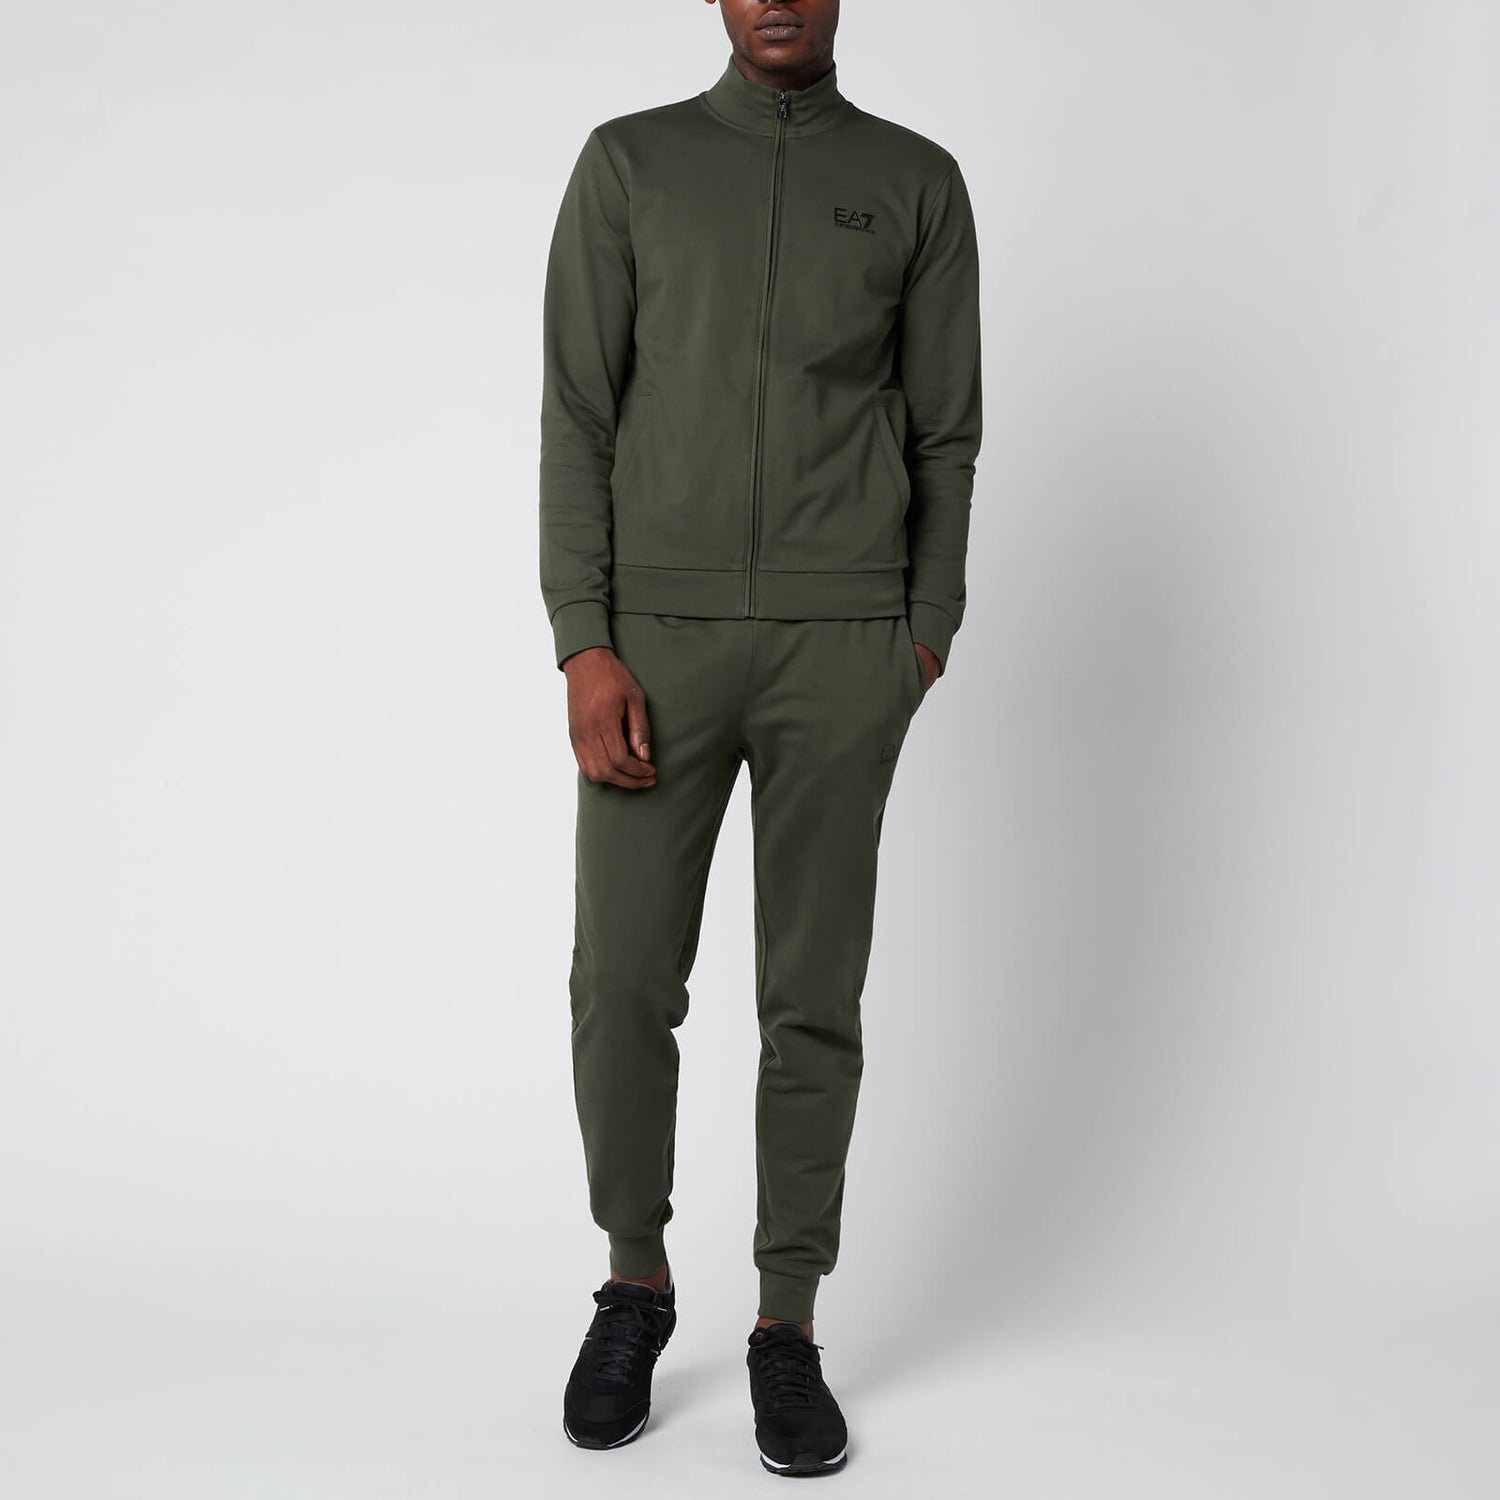 EA7 Men's Train Core ID French Terry Tracksuit - Climbing Ivy